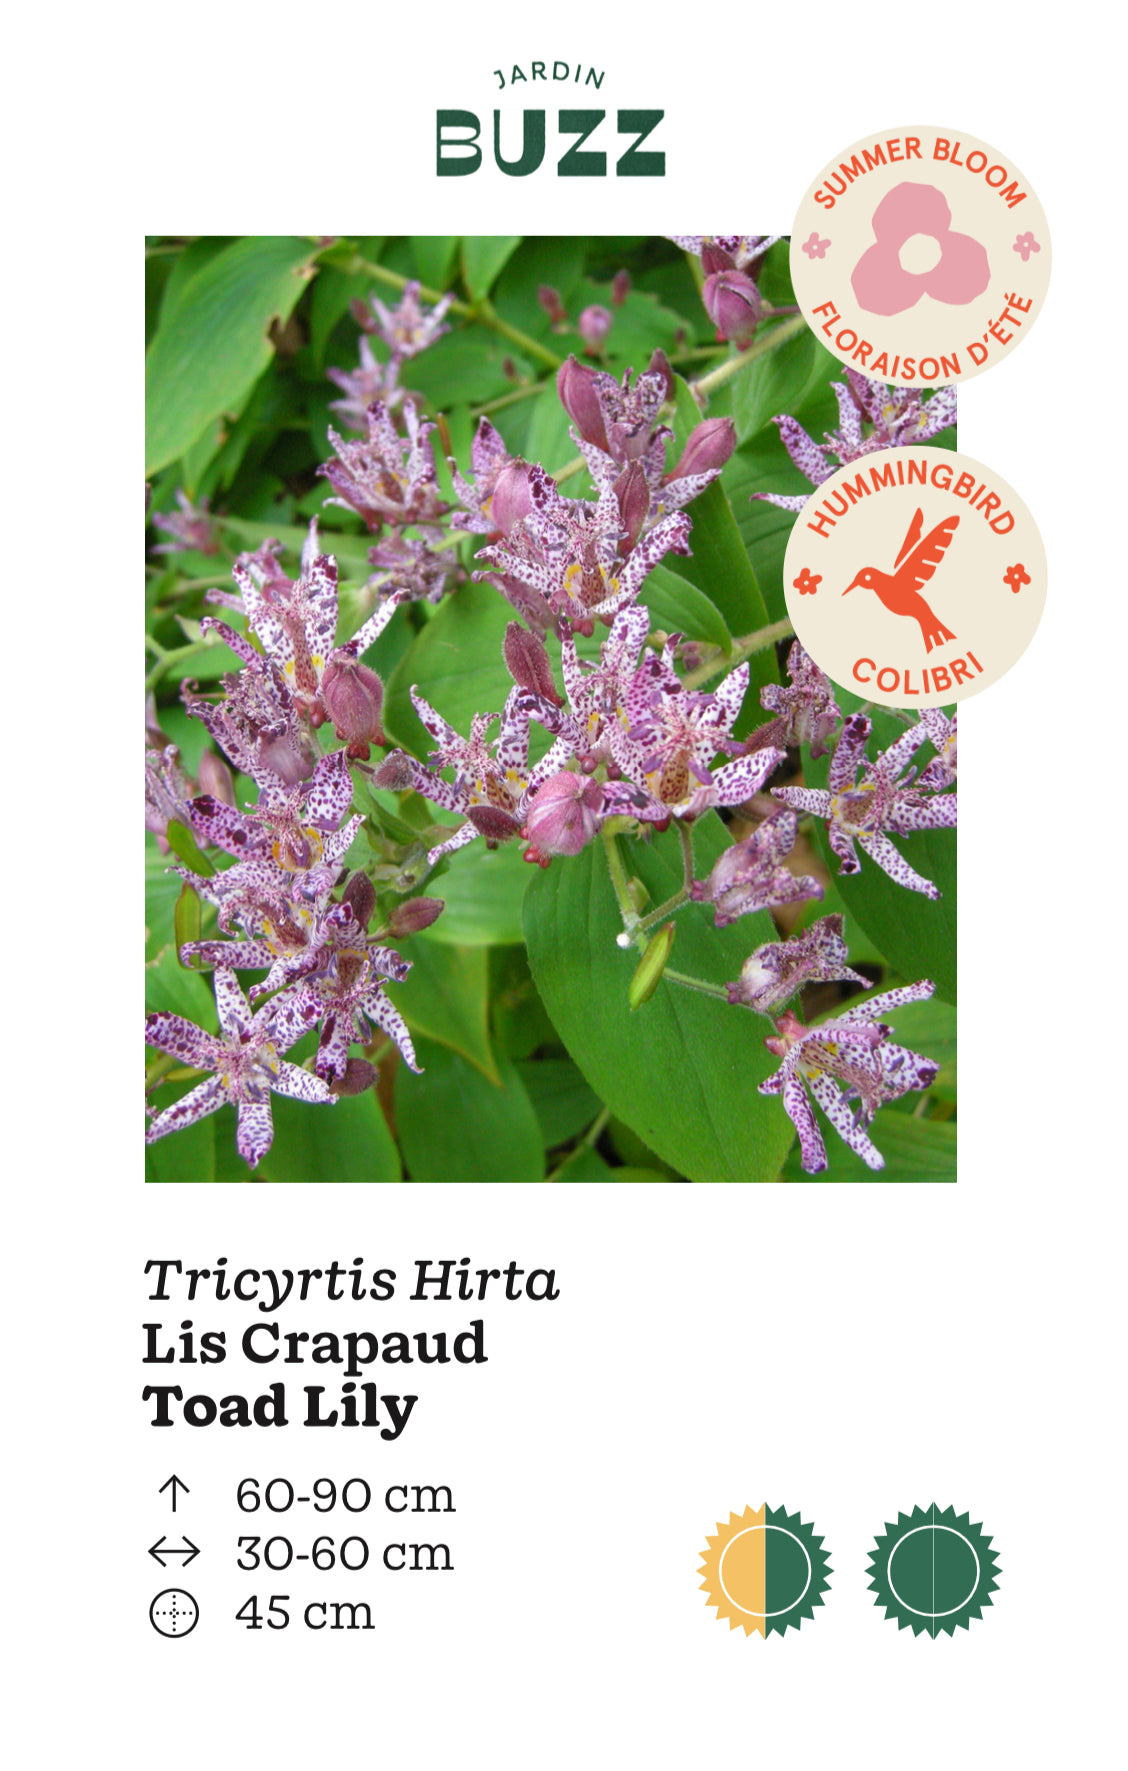 Tricytis Hirta/ Japanese Toad Lilly / Lis crapaud